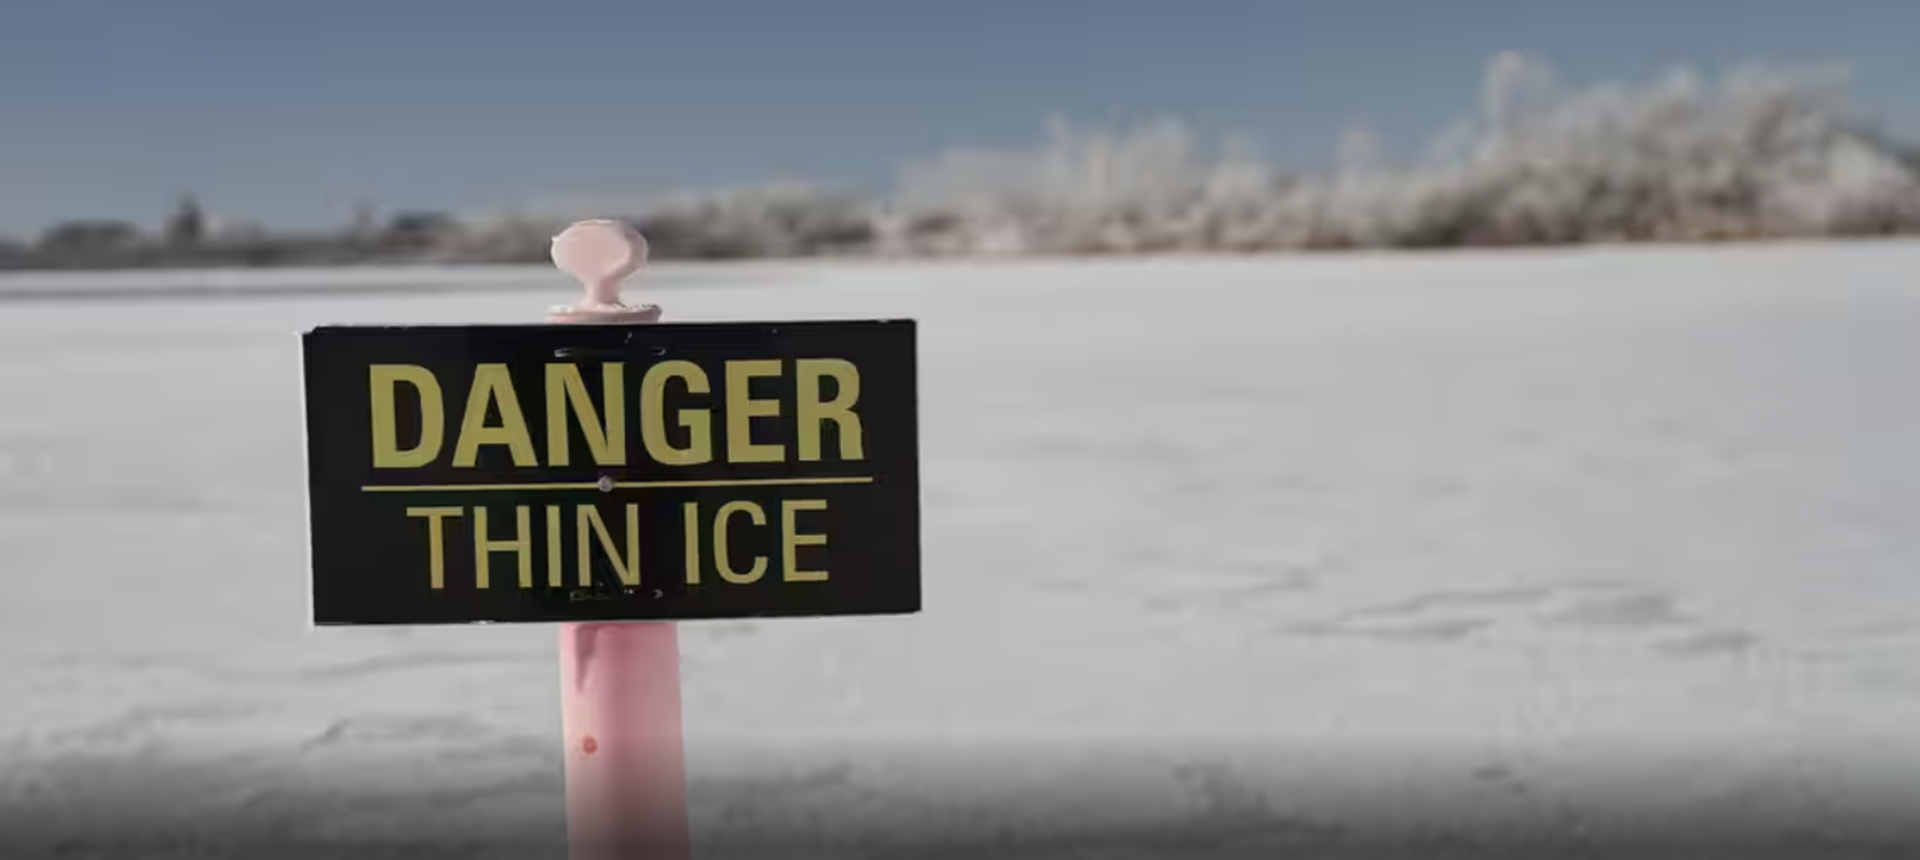 Ice can be very deceiving,' warns expert after recent tragedies - The  Weather Network